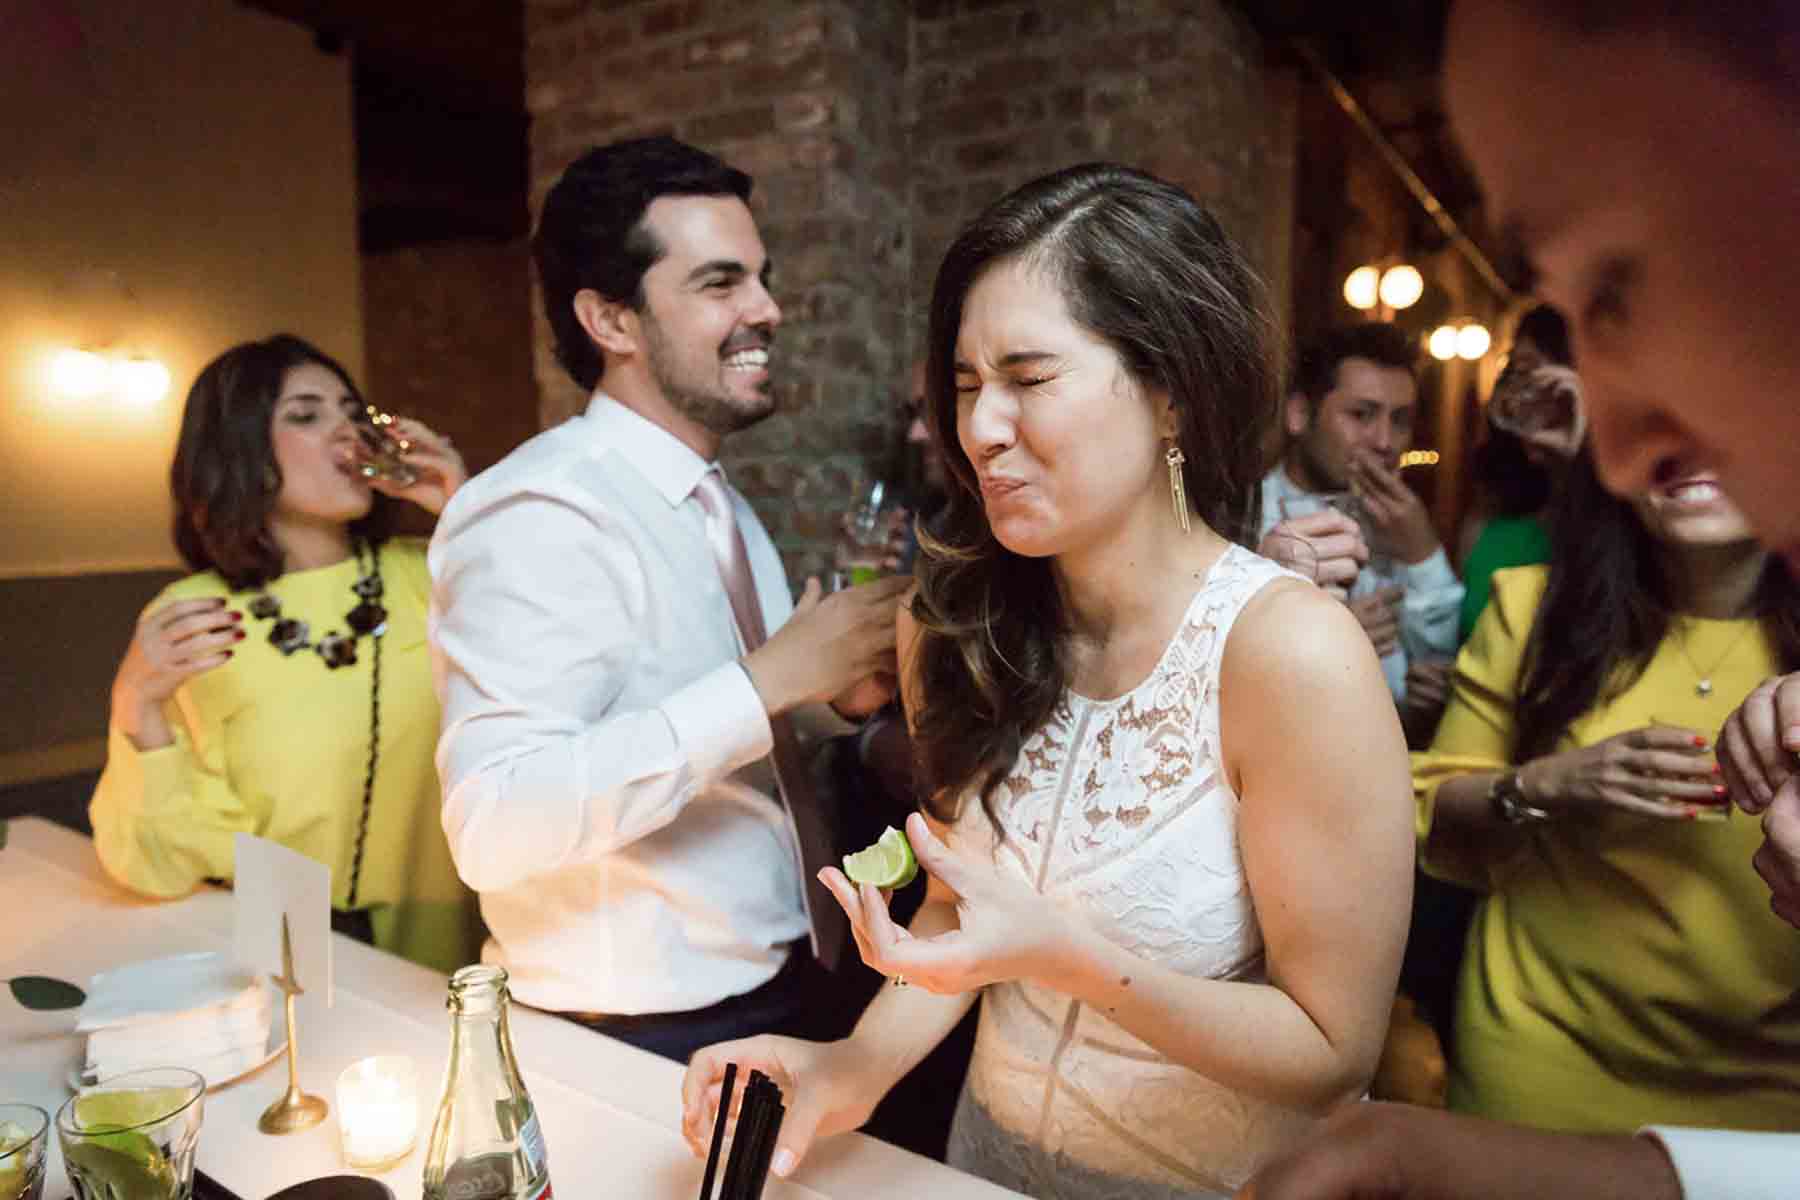 Bride and groom eating lime and drinking tequila for an article on how to save money on wedding photography